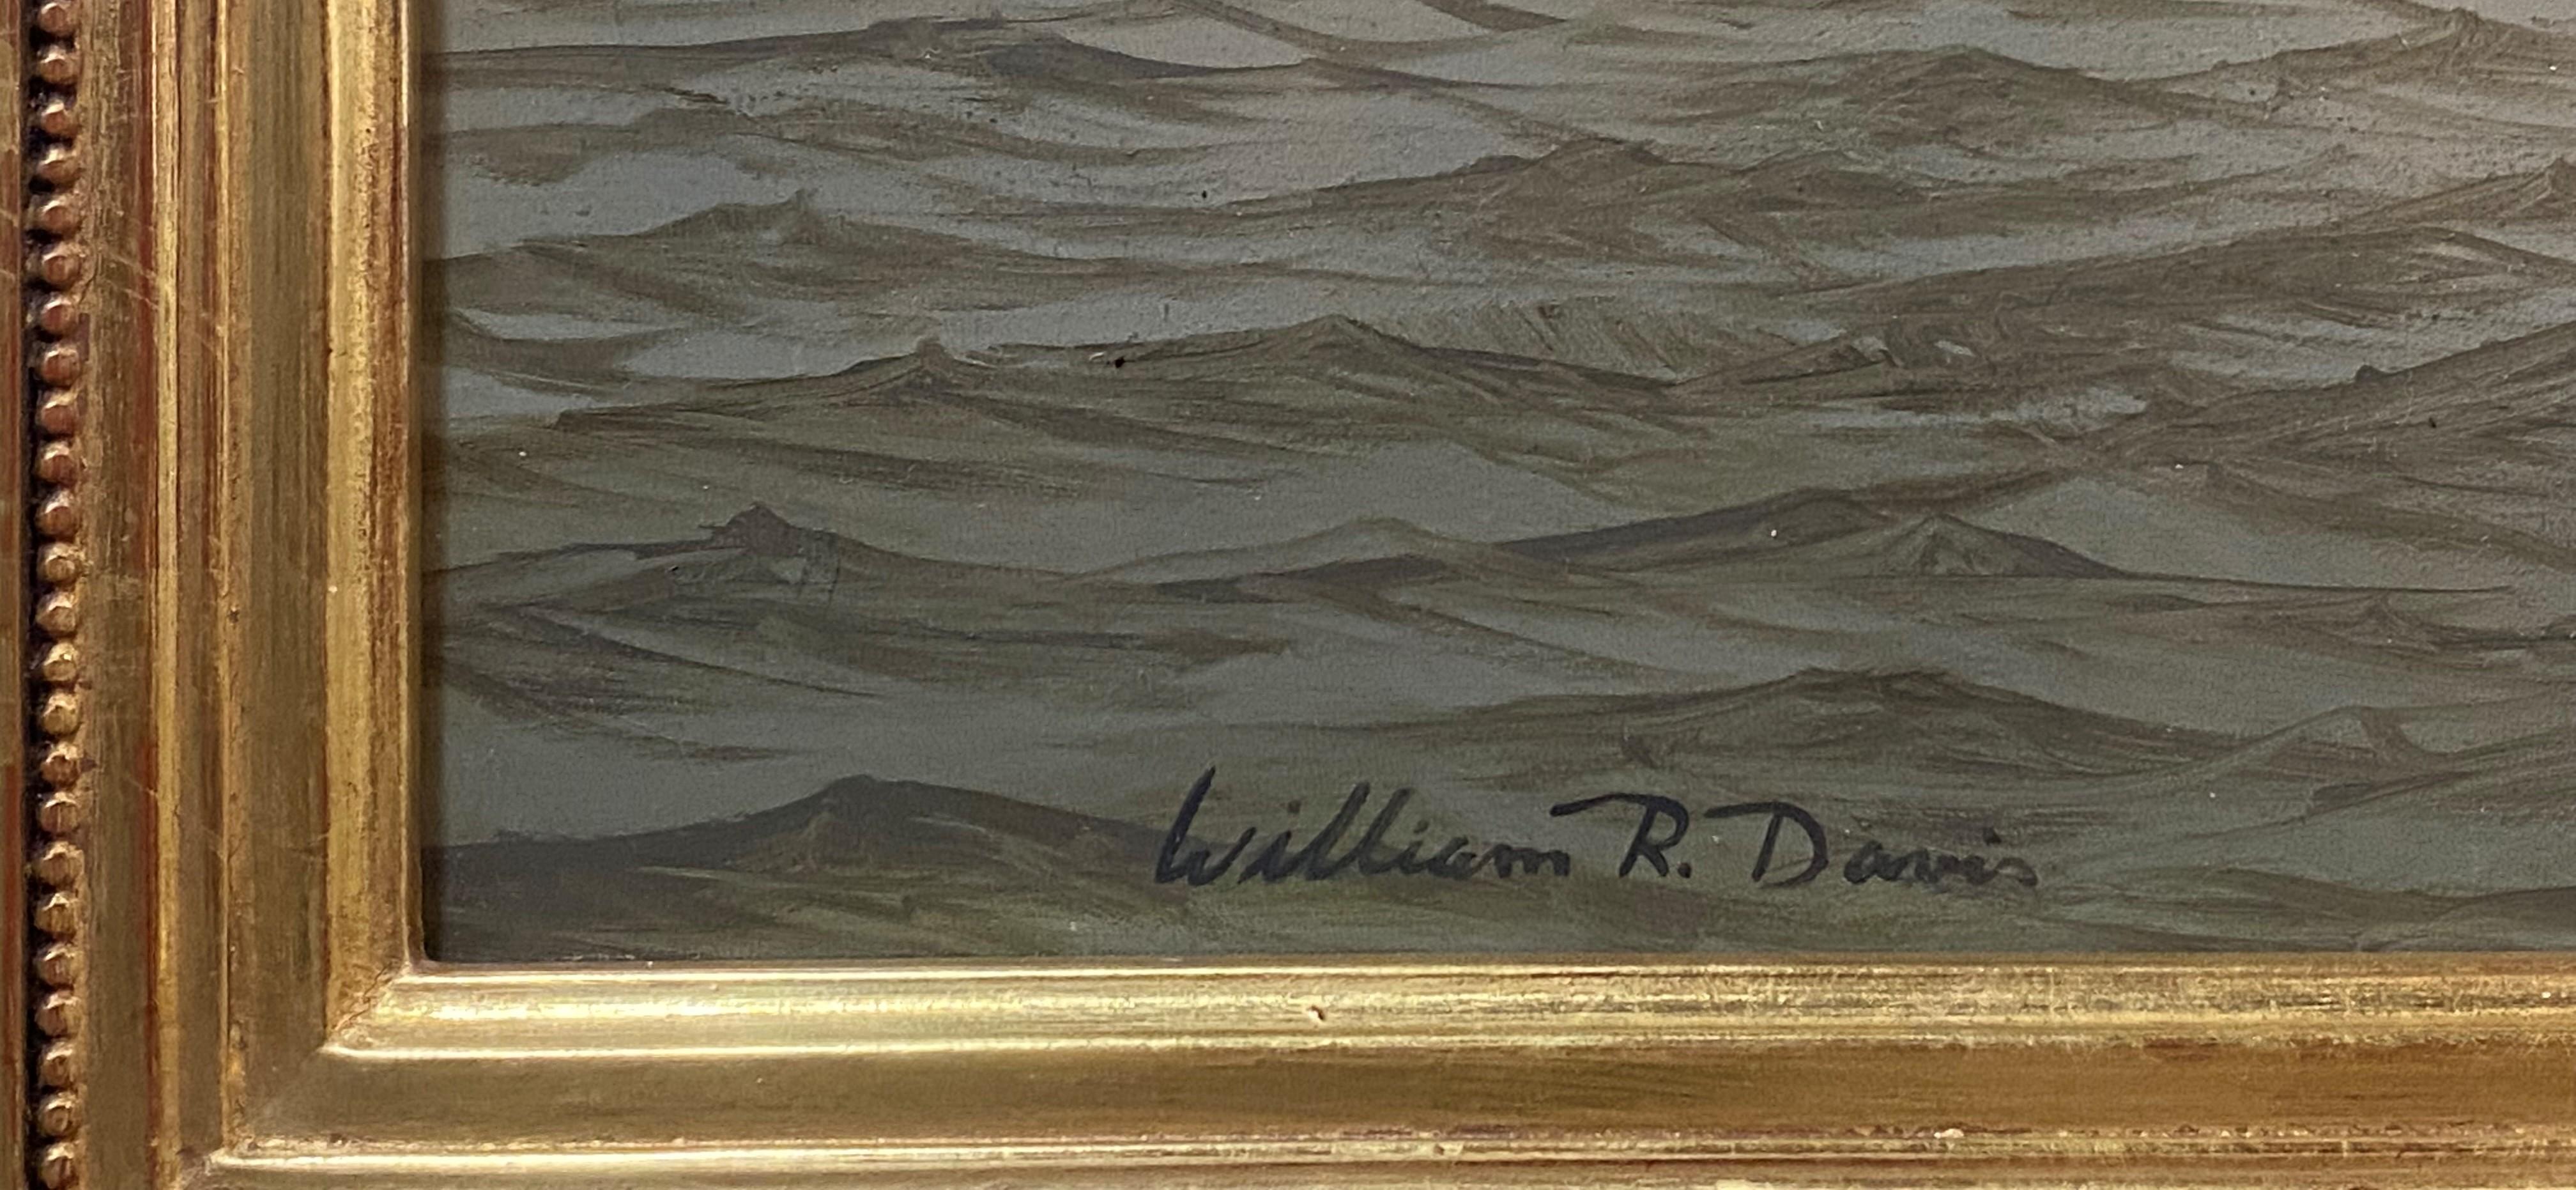 Drifting in Light Wind - Brown Landscape Painting by William R. Davis